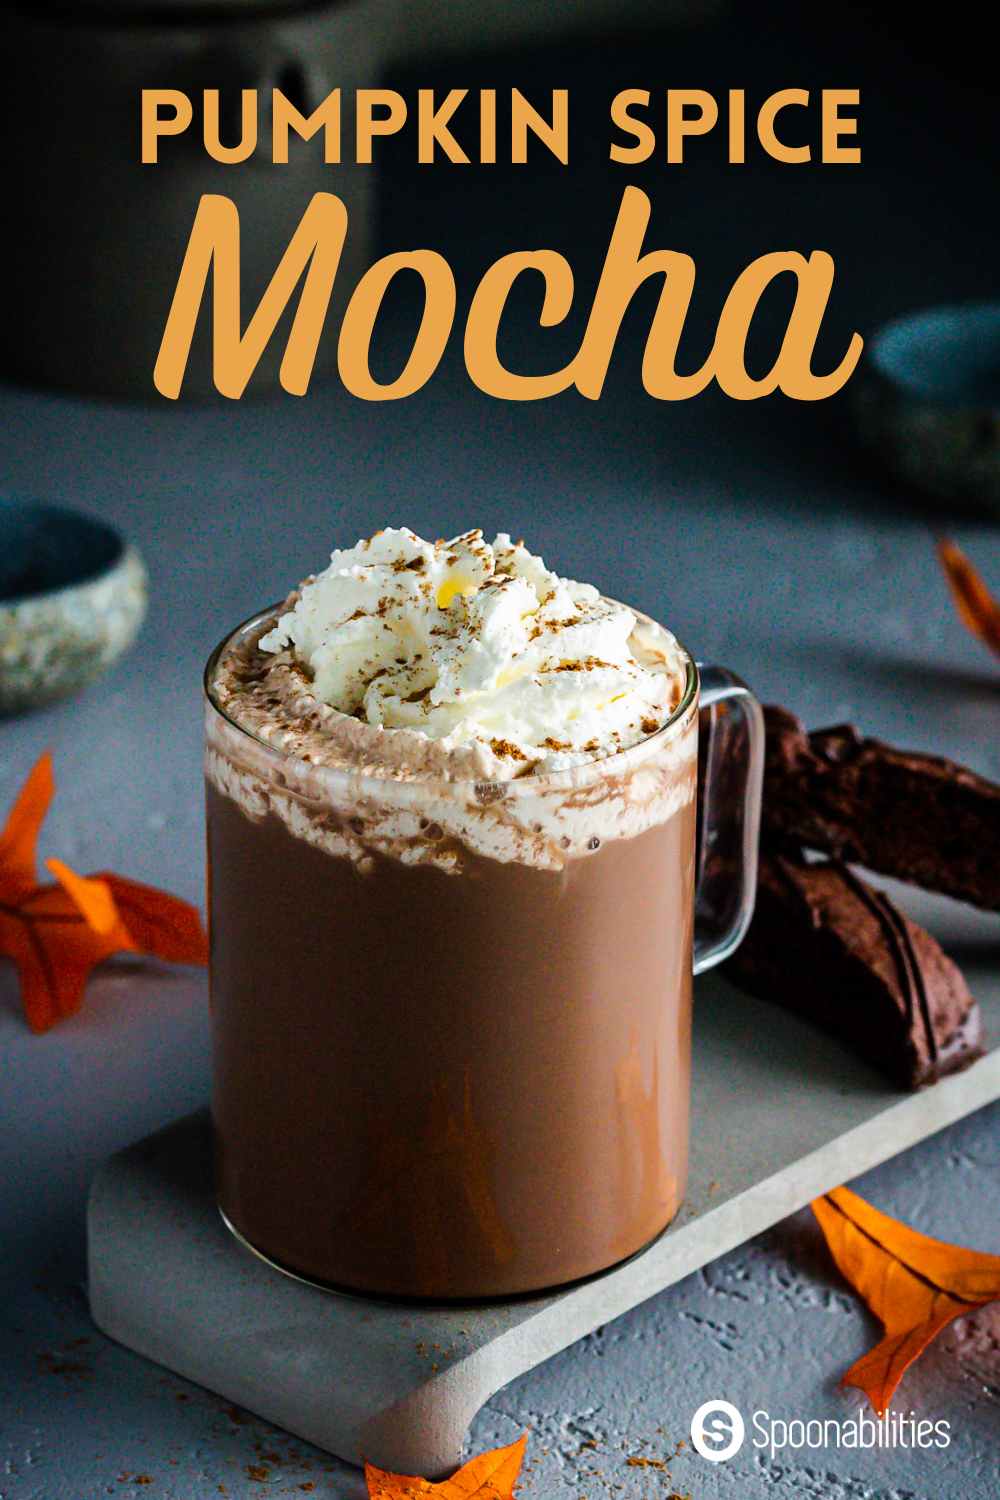 Pumpkin Spice Mocha with whipped cream on top and a couple of chocolate pastries at the back